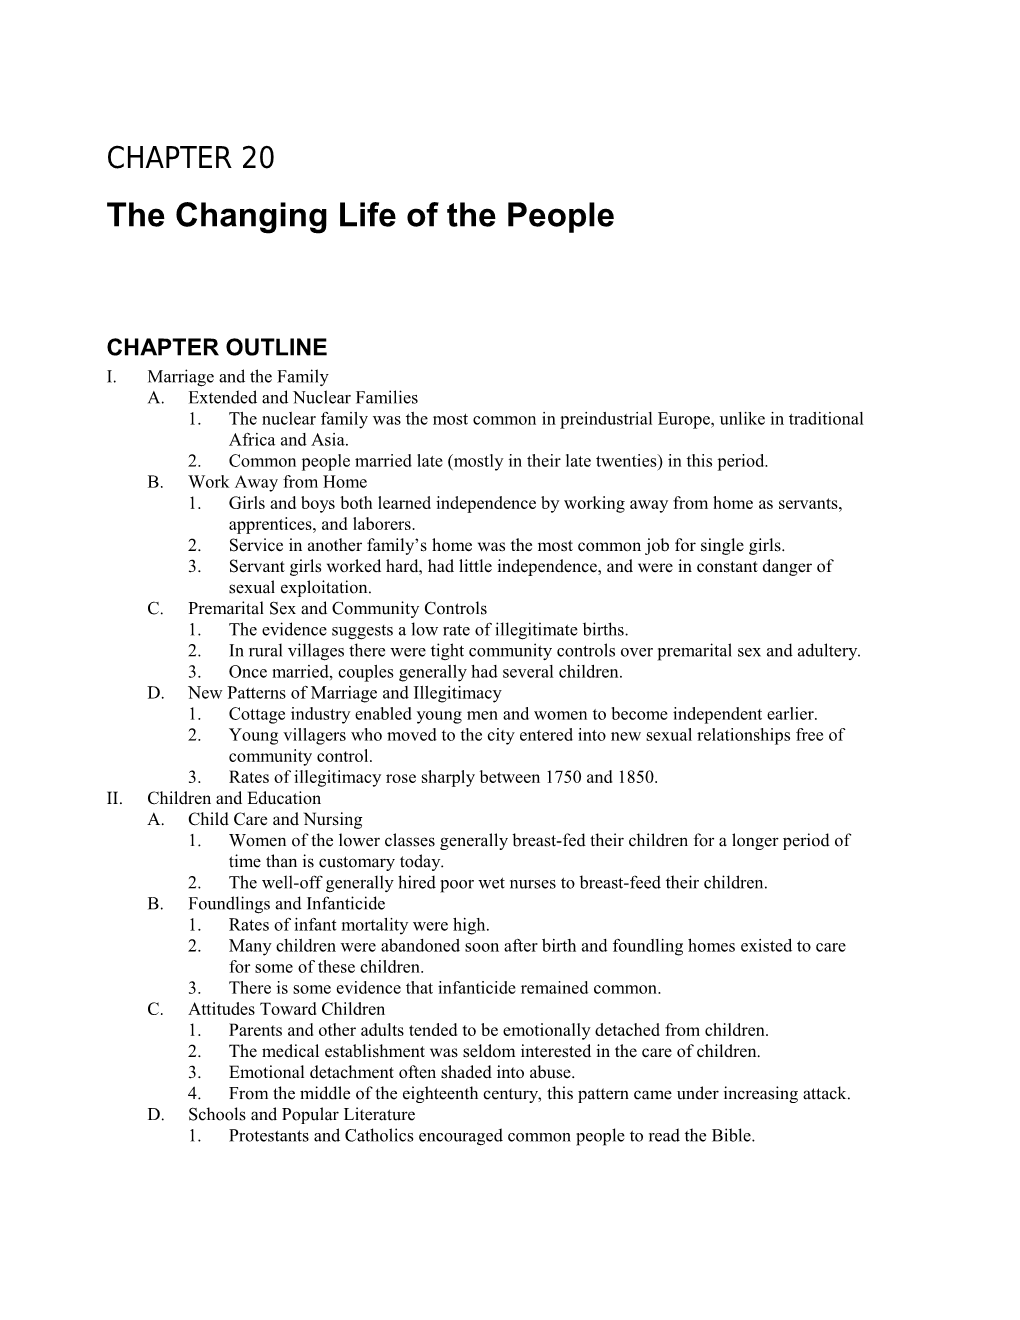 The Changing Life of the People